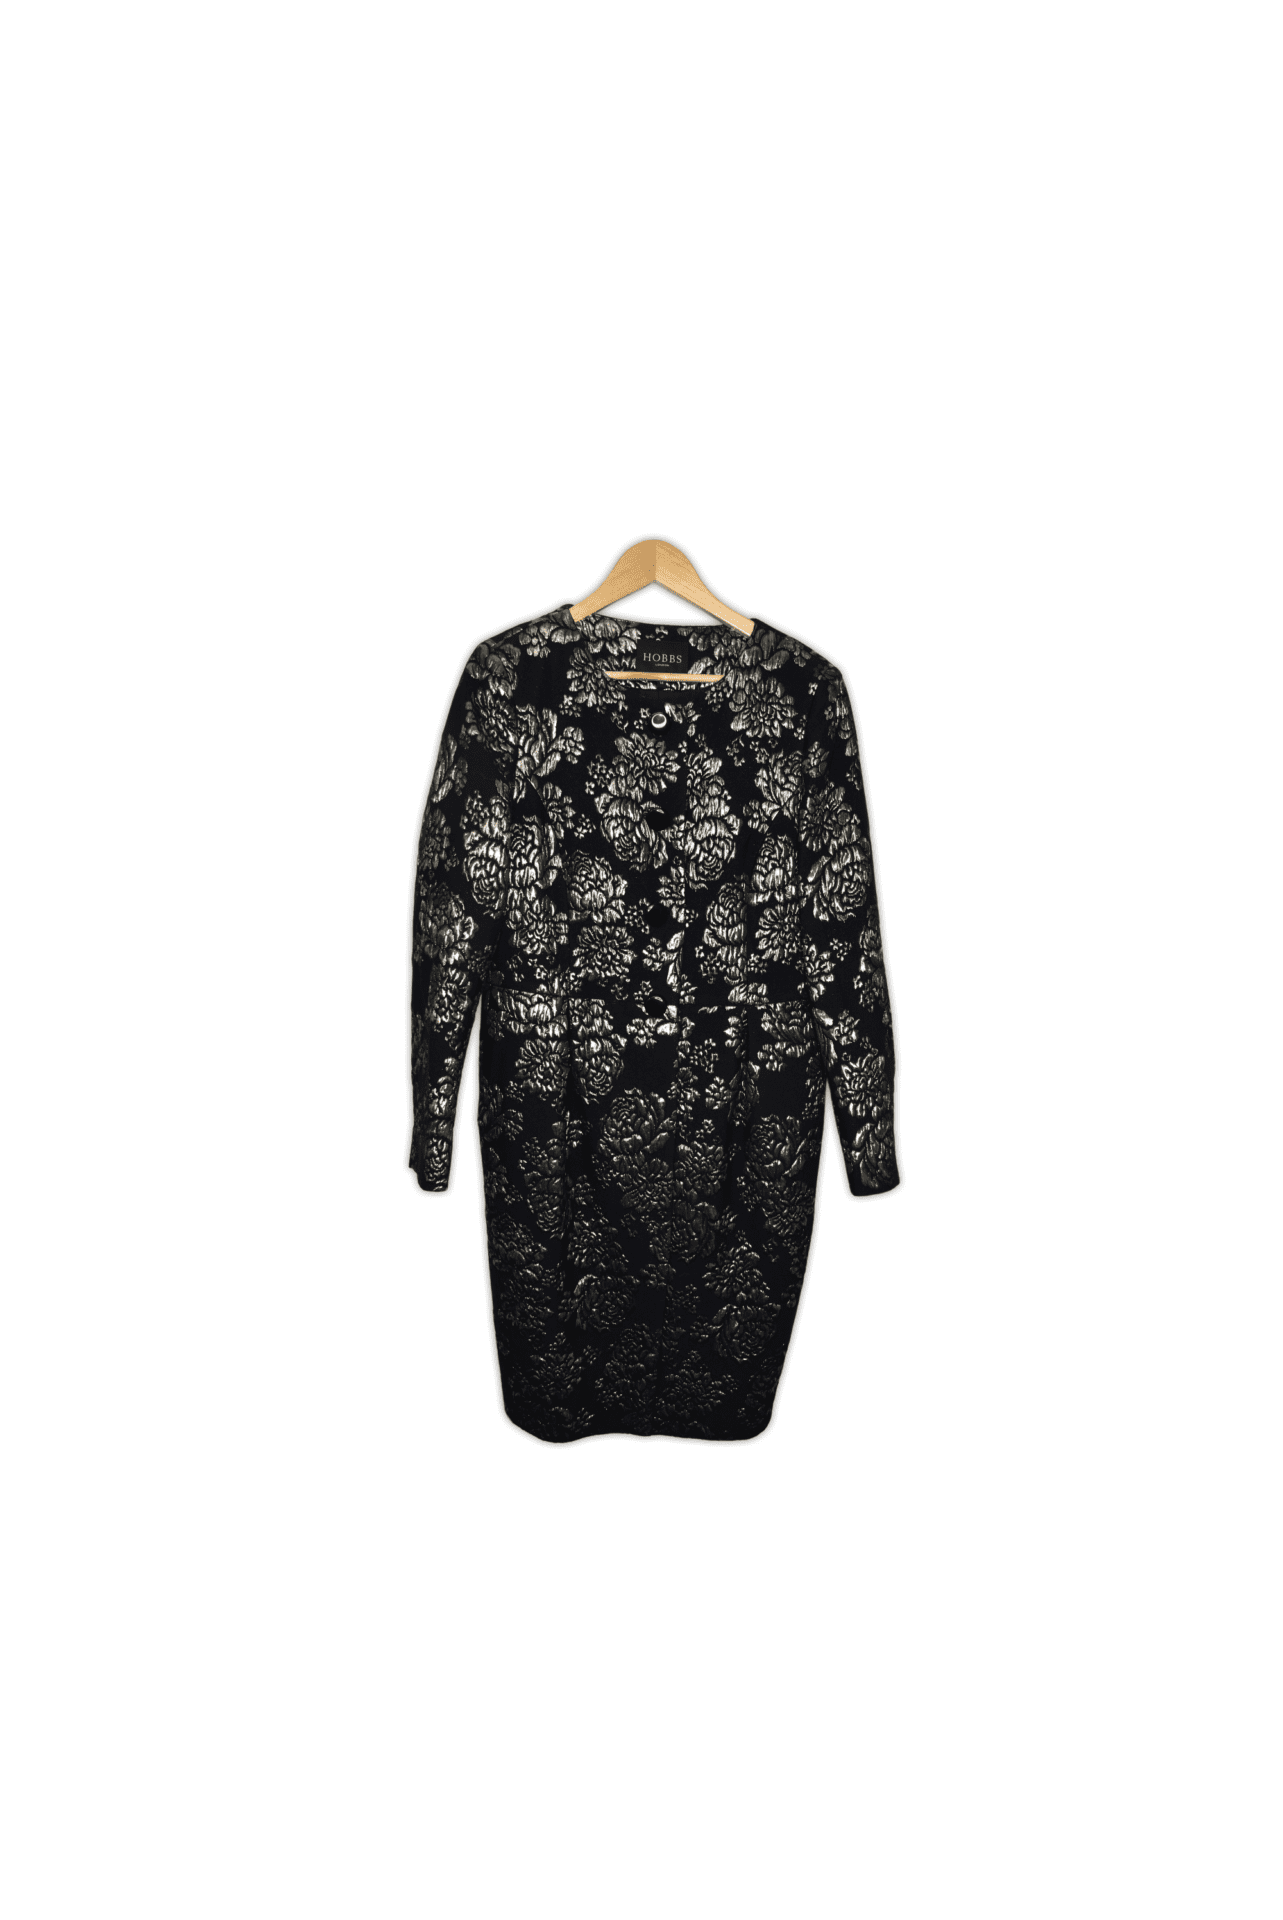 Large, gold and black floral embossed coat